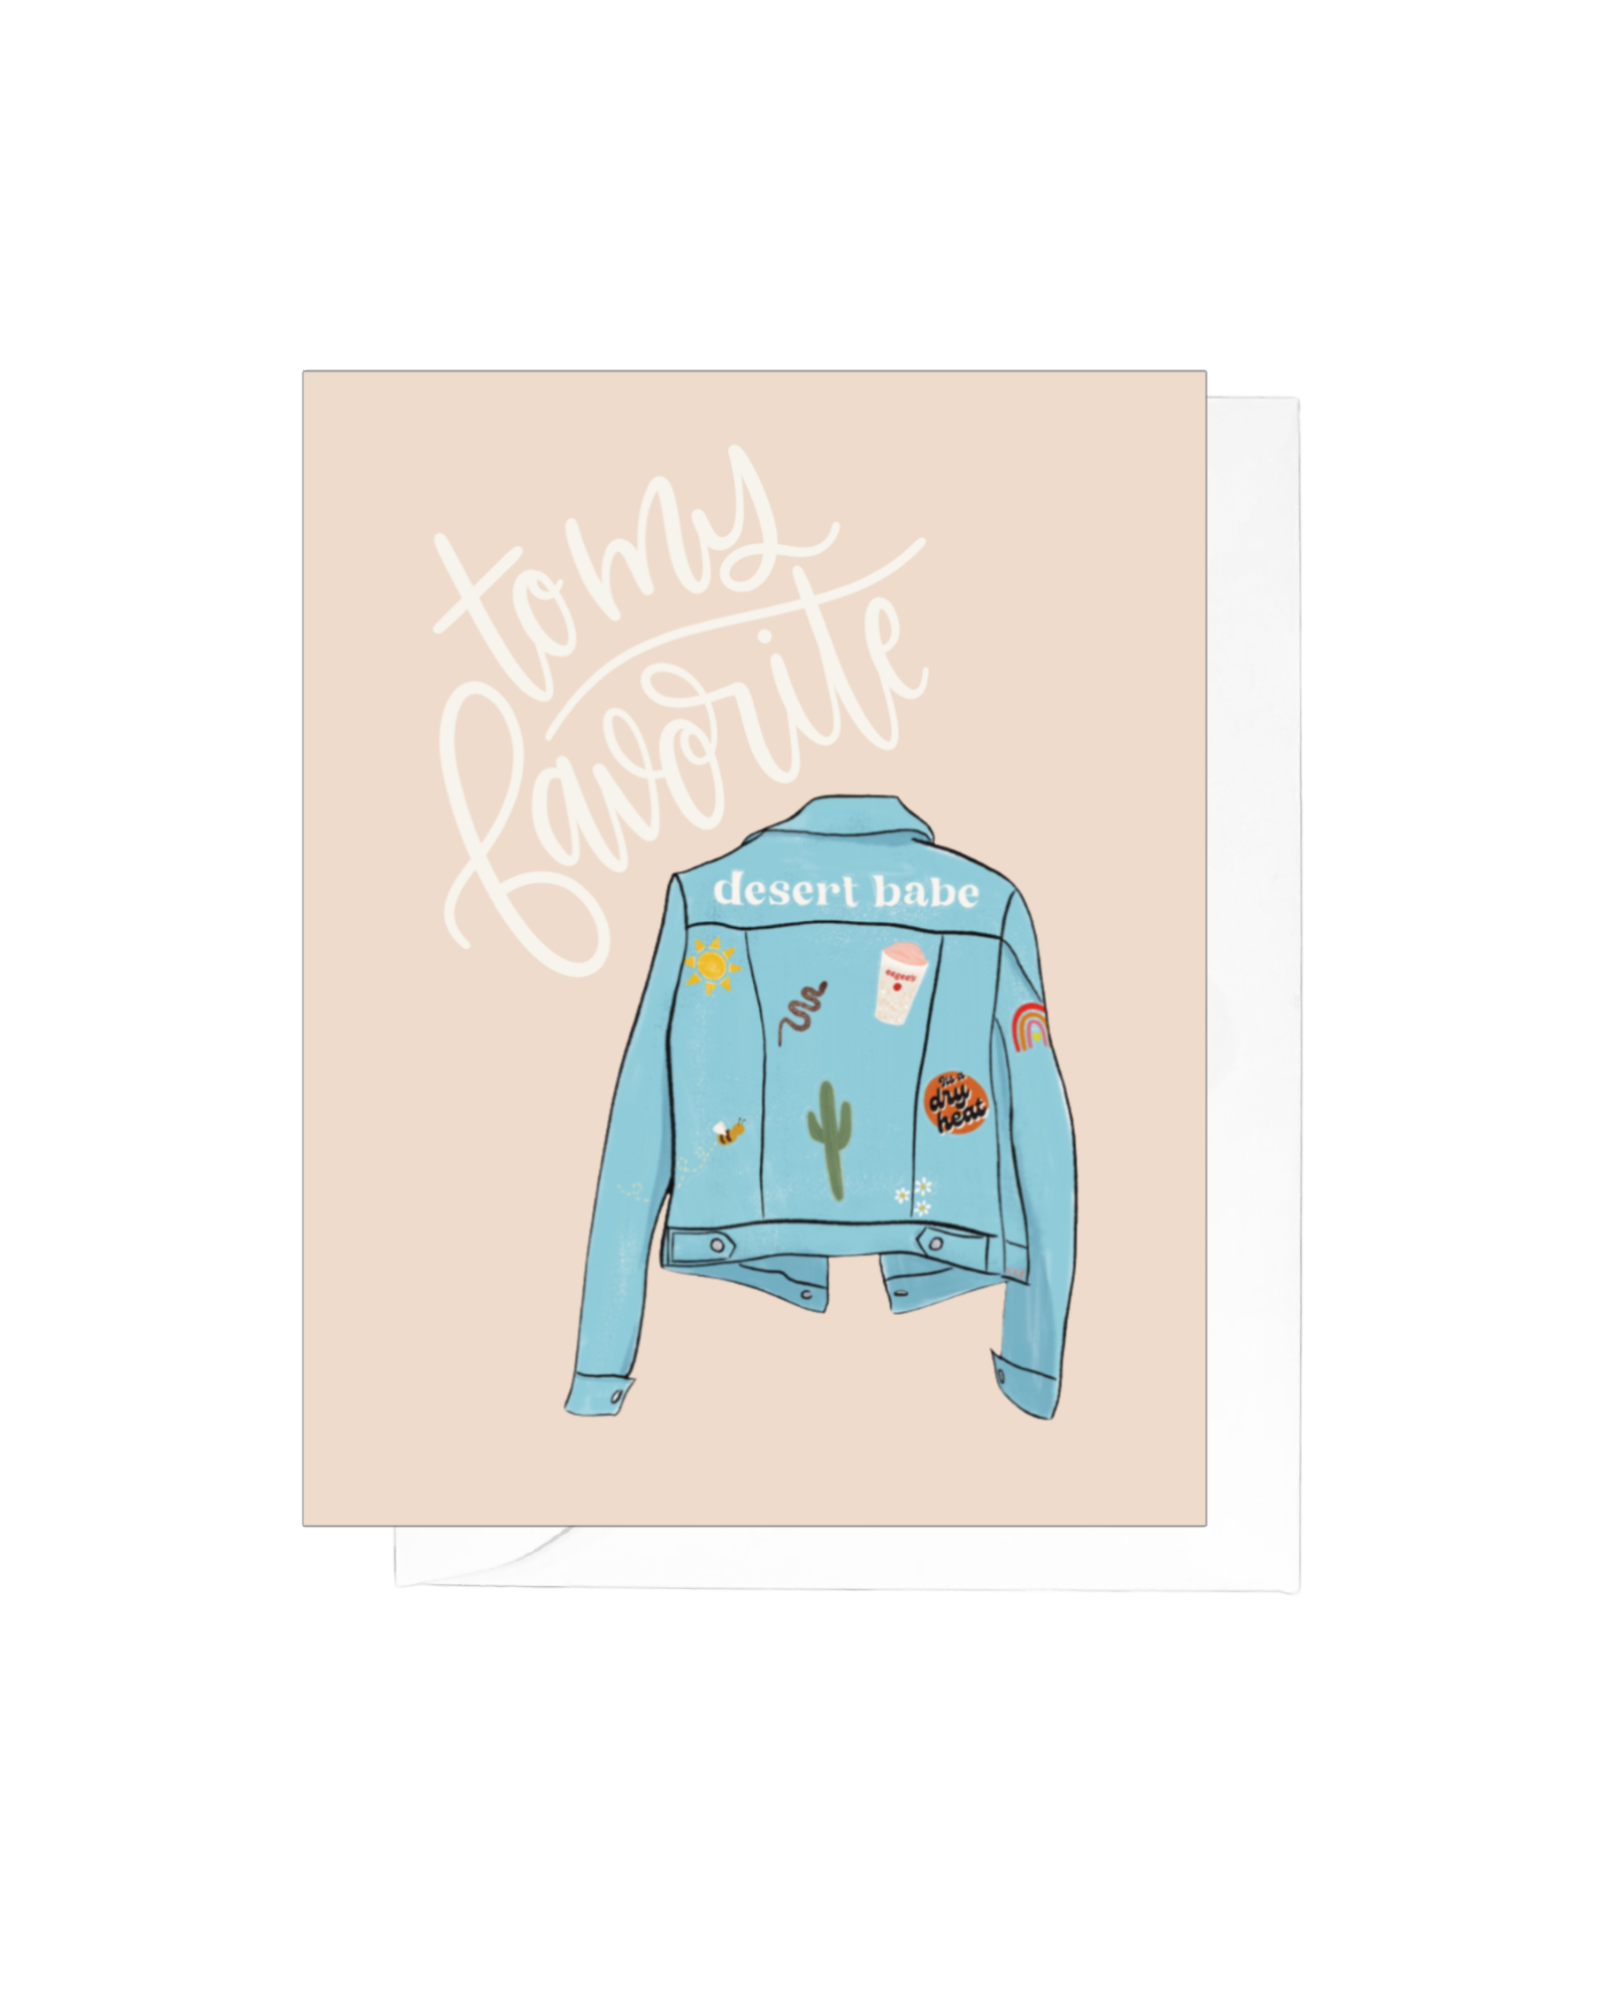 Tan greeting card with desert babe denim jacket and the words "to my favorite desert babe"